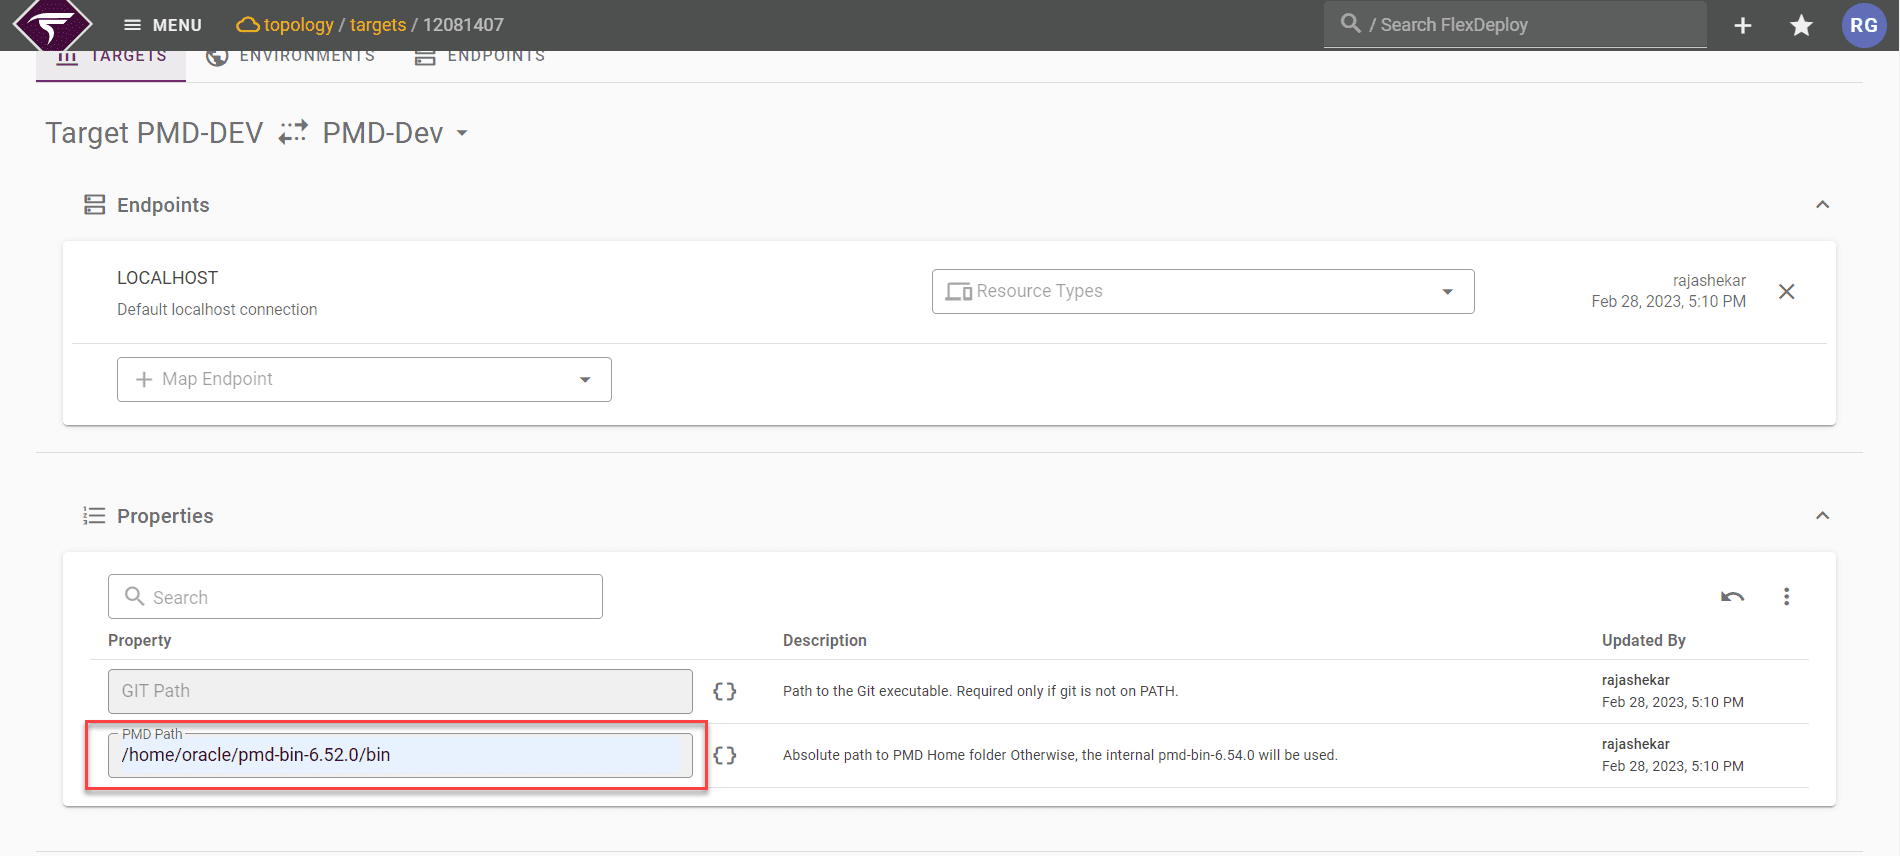 Configure the PMD Scan in FlexDeploy